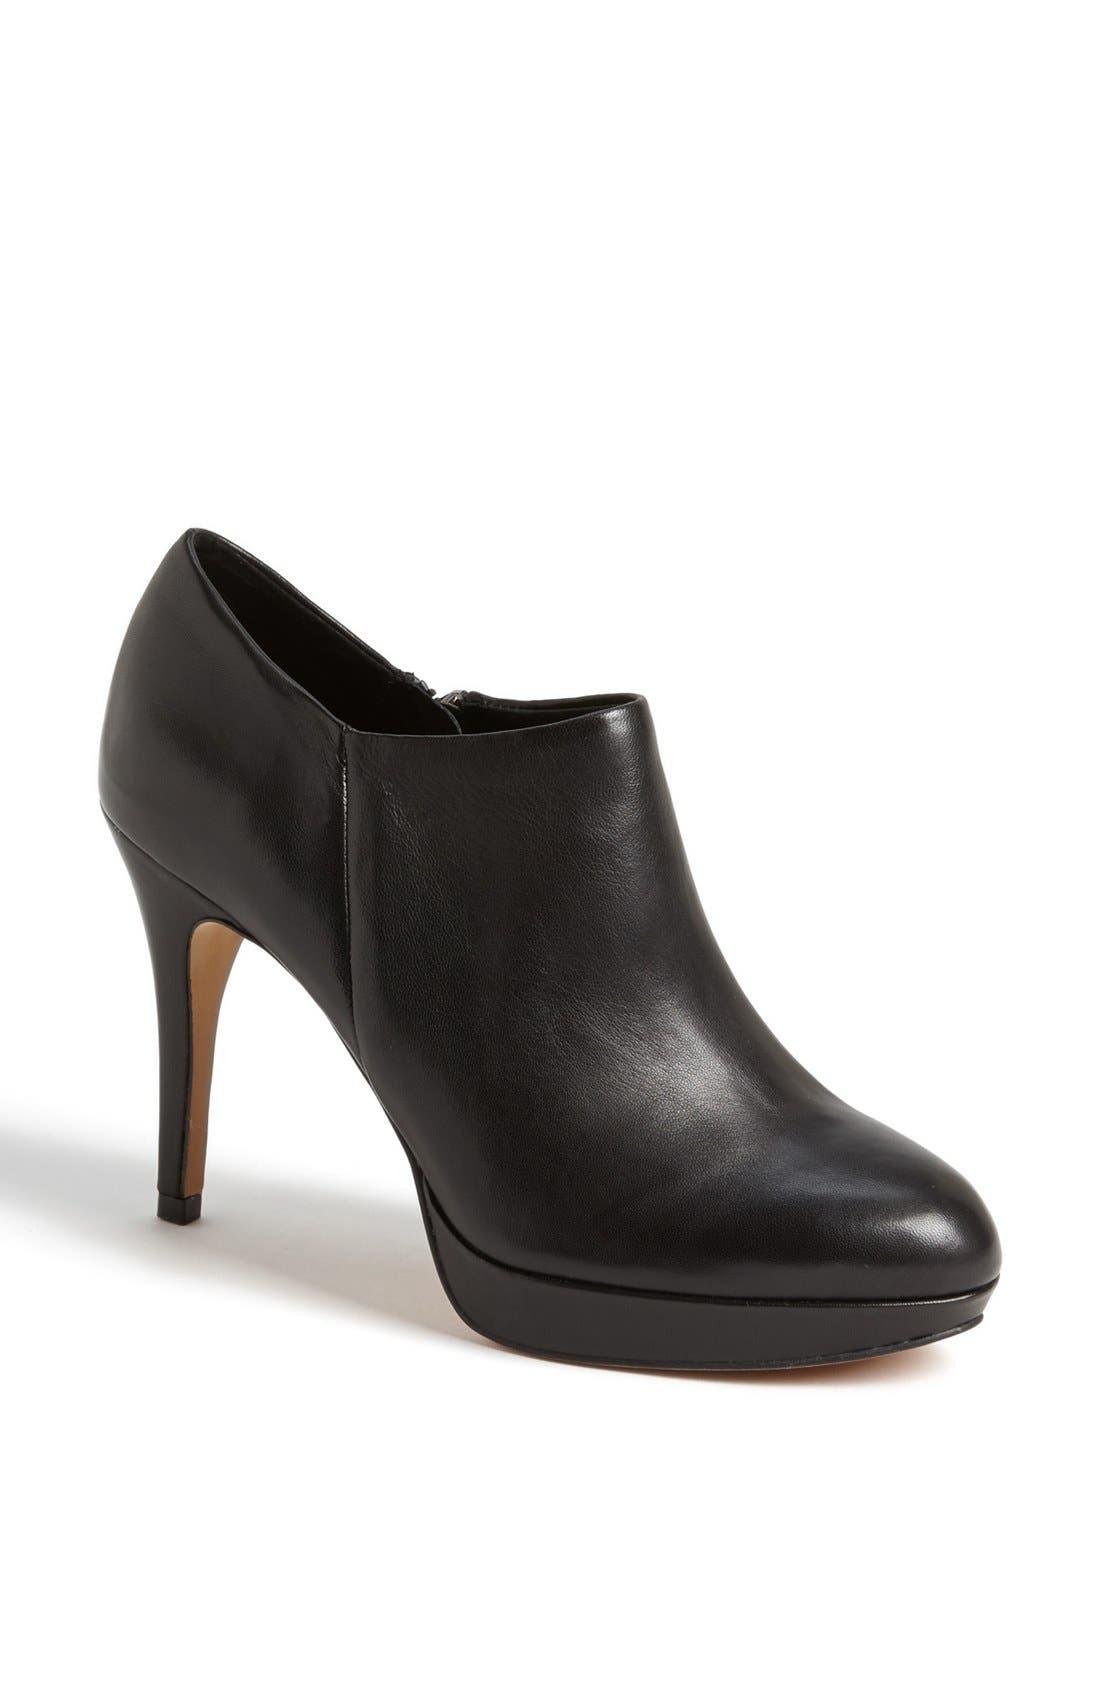 UPC 886216641325 product image for Women's Vince Camuto 'Elvin' Bootie, Size 6 M - Black | upcitemdb.com